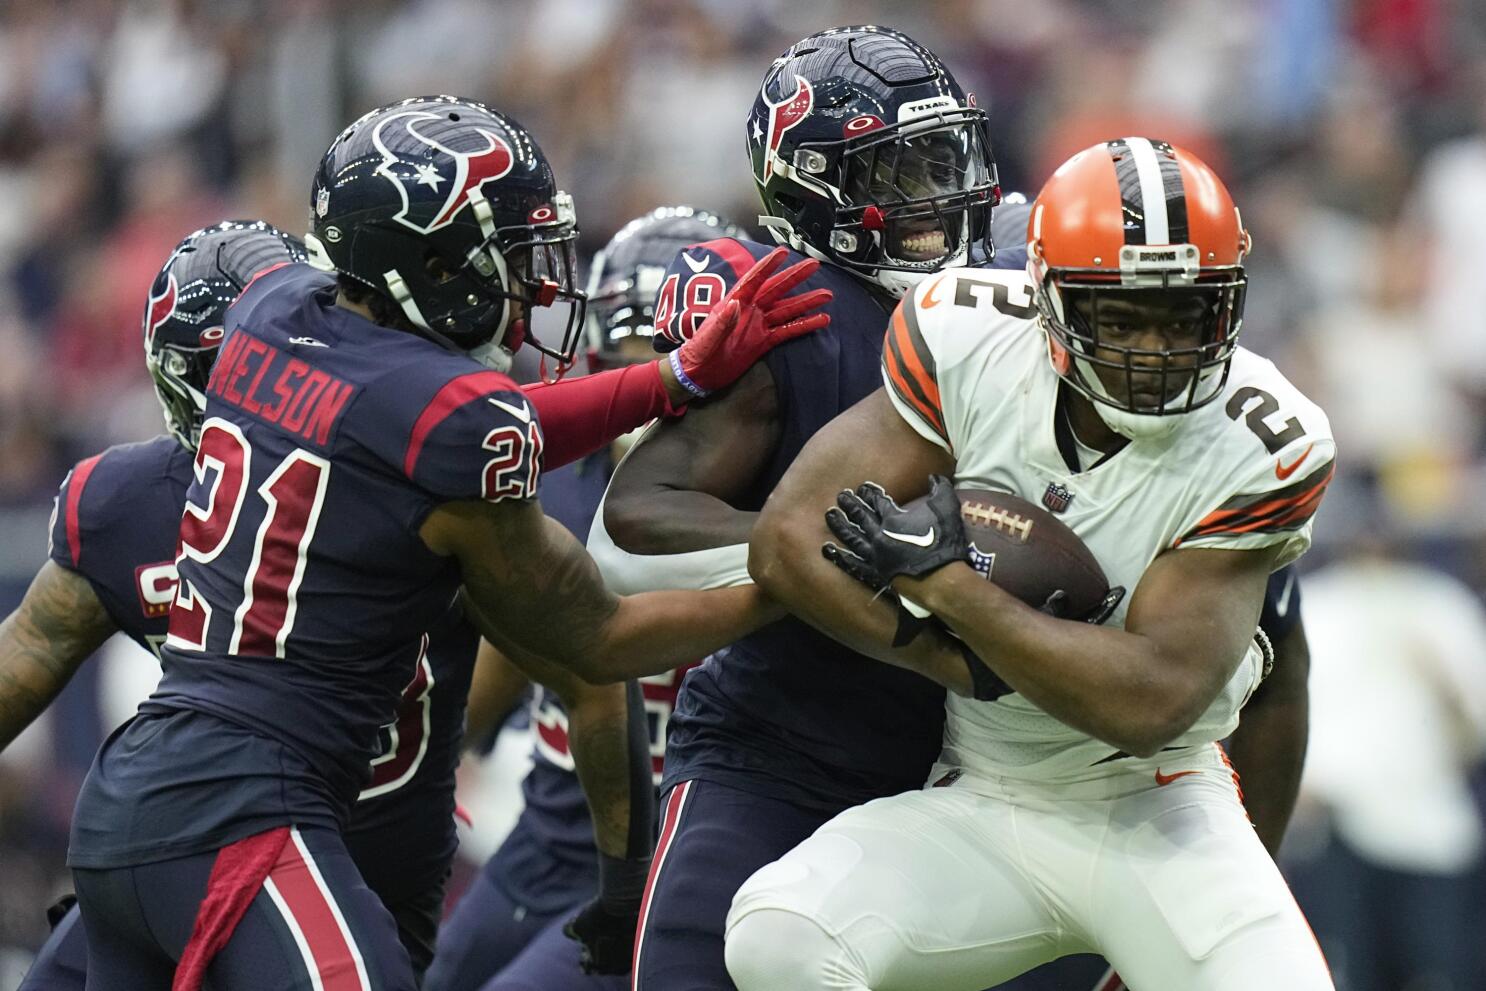 Amari Cooper Injury Update: Will the Browns' WR Play in Week 2